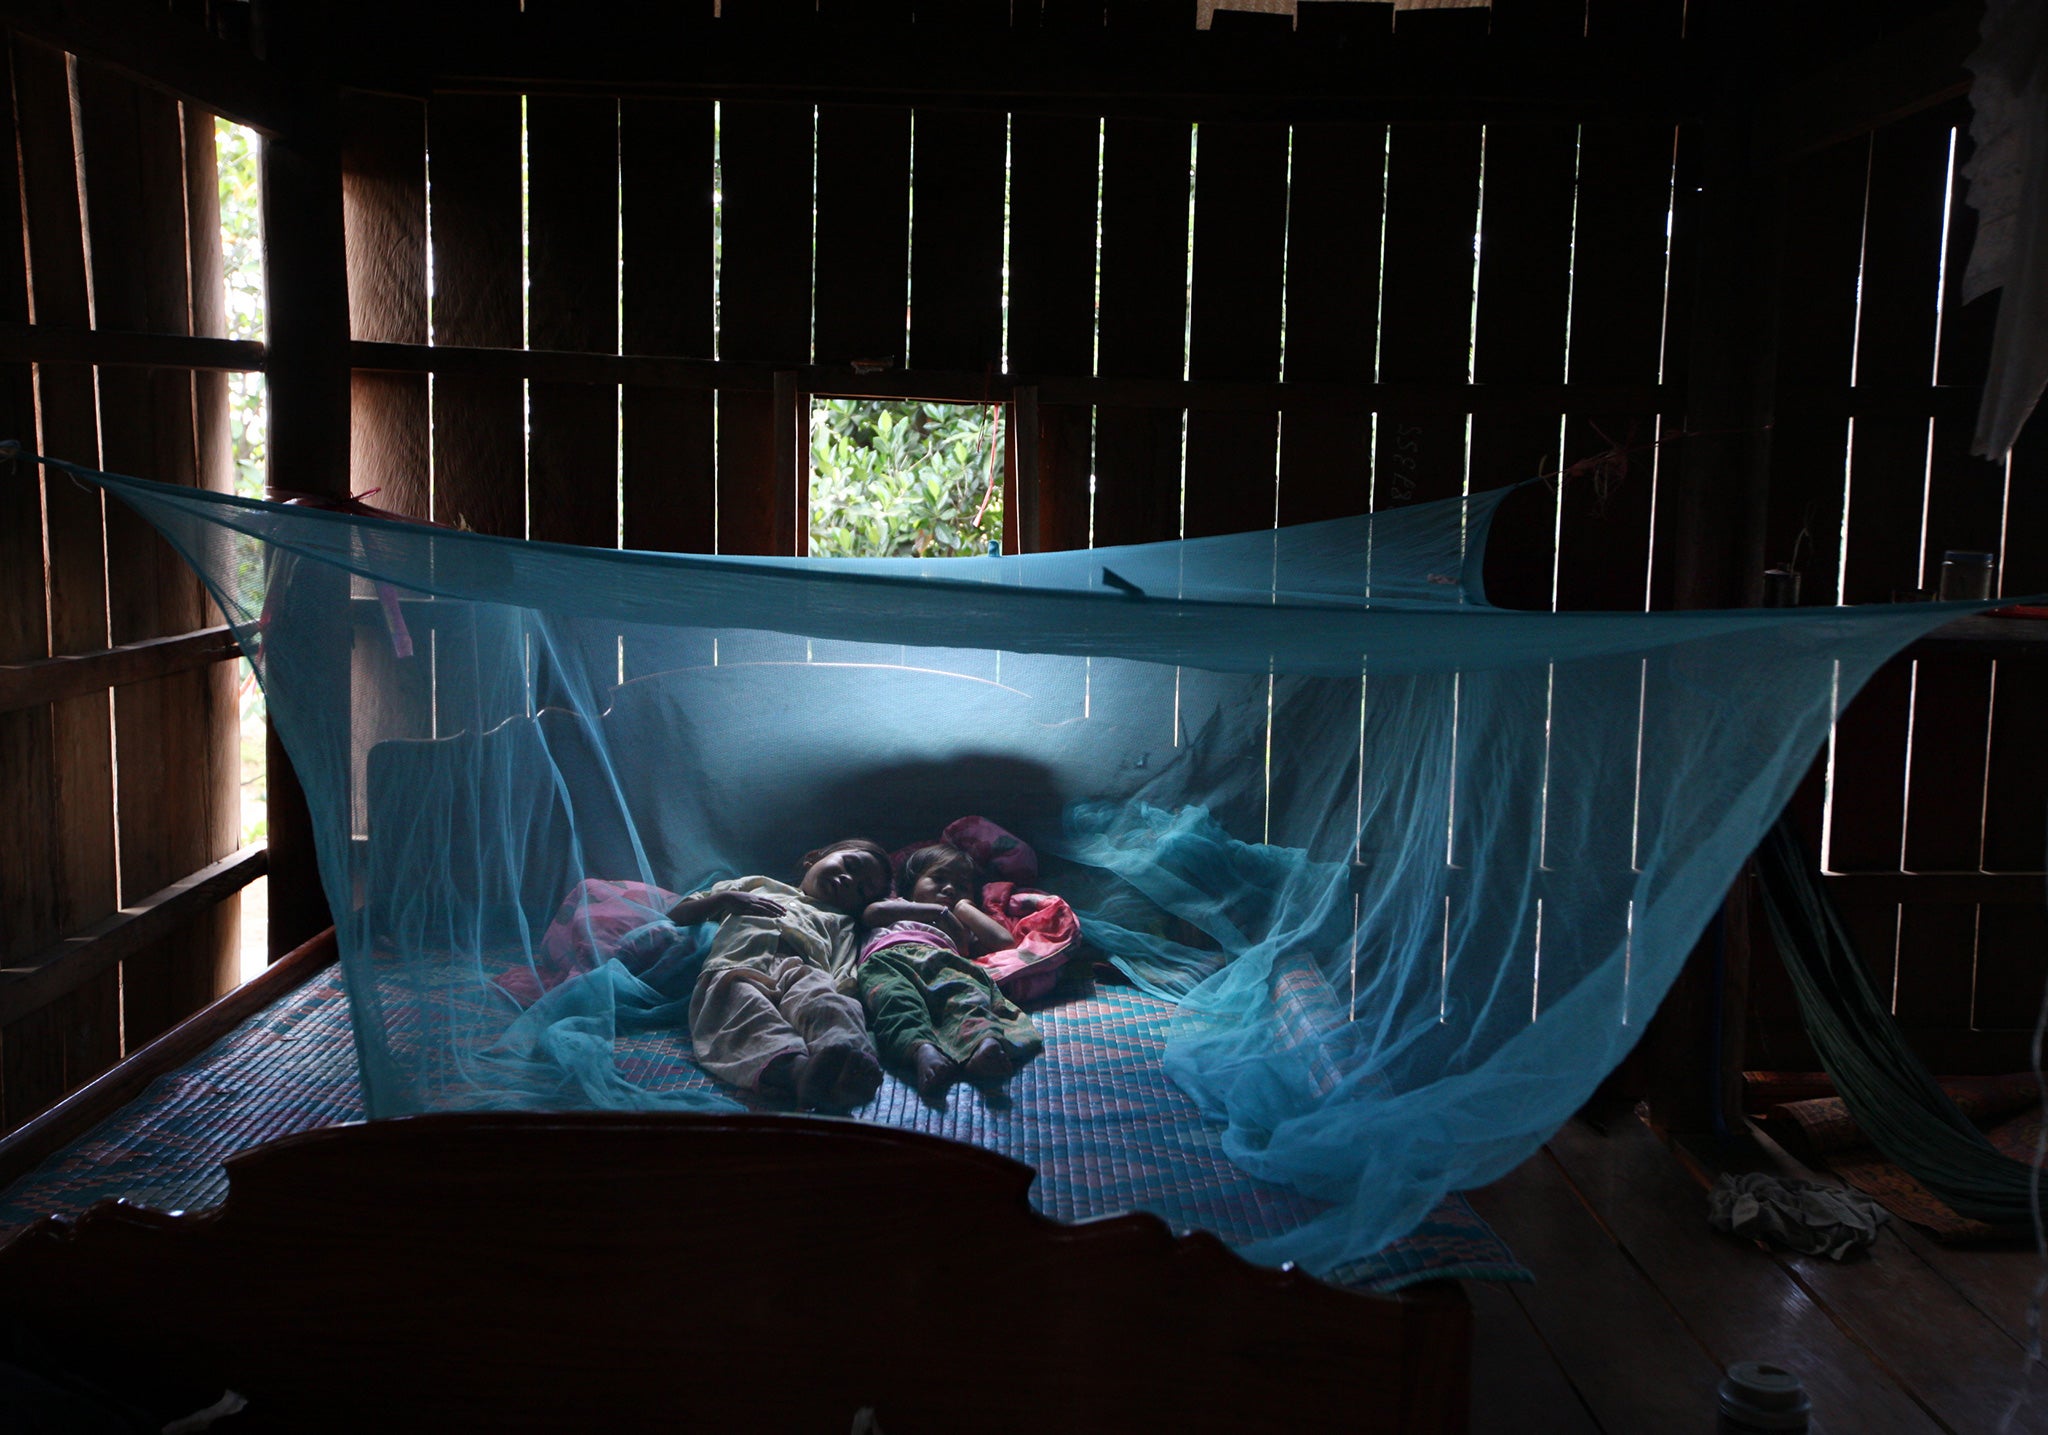 There are an estimated 198 million cases of malaria a year